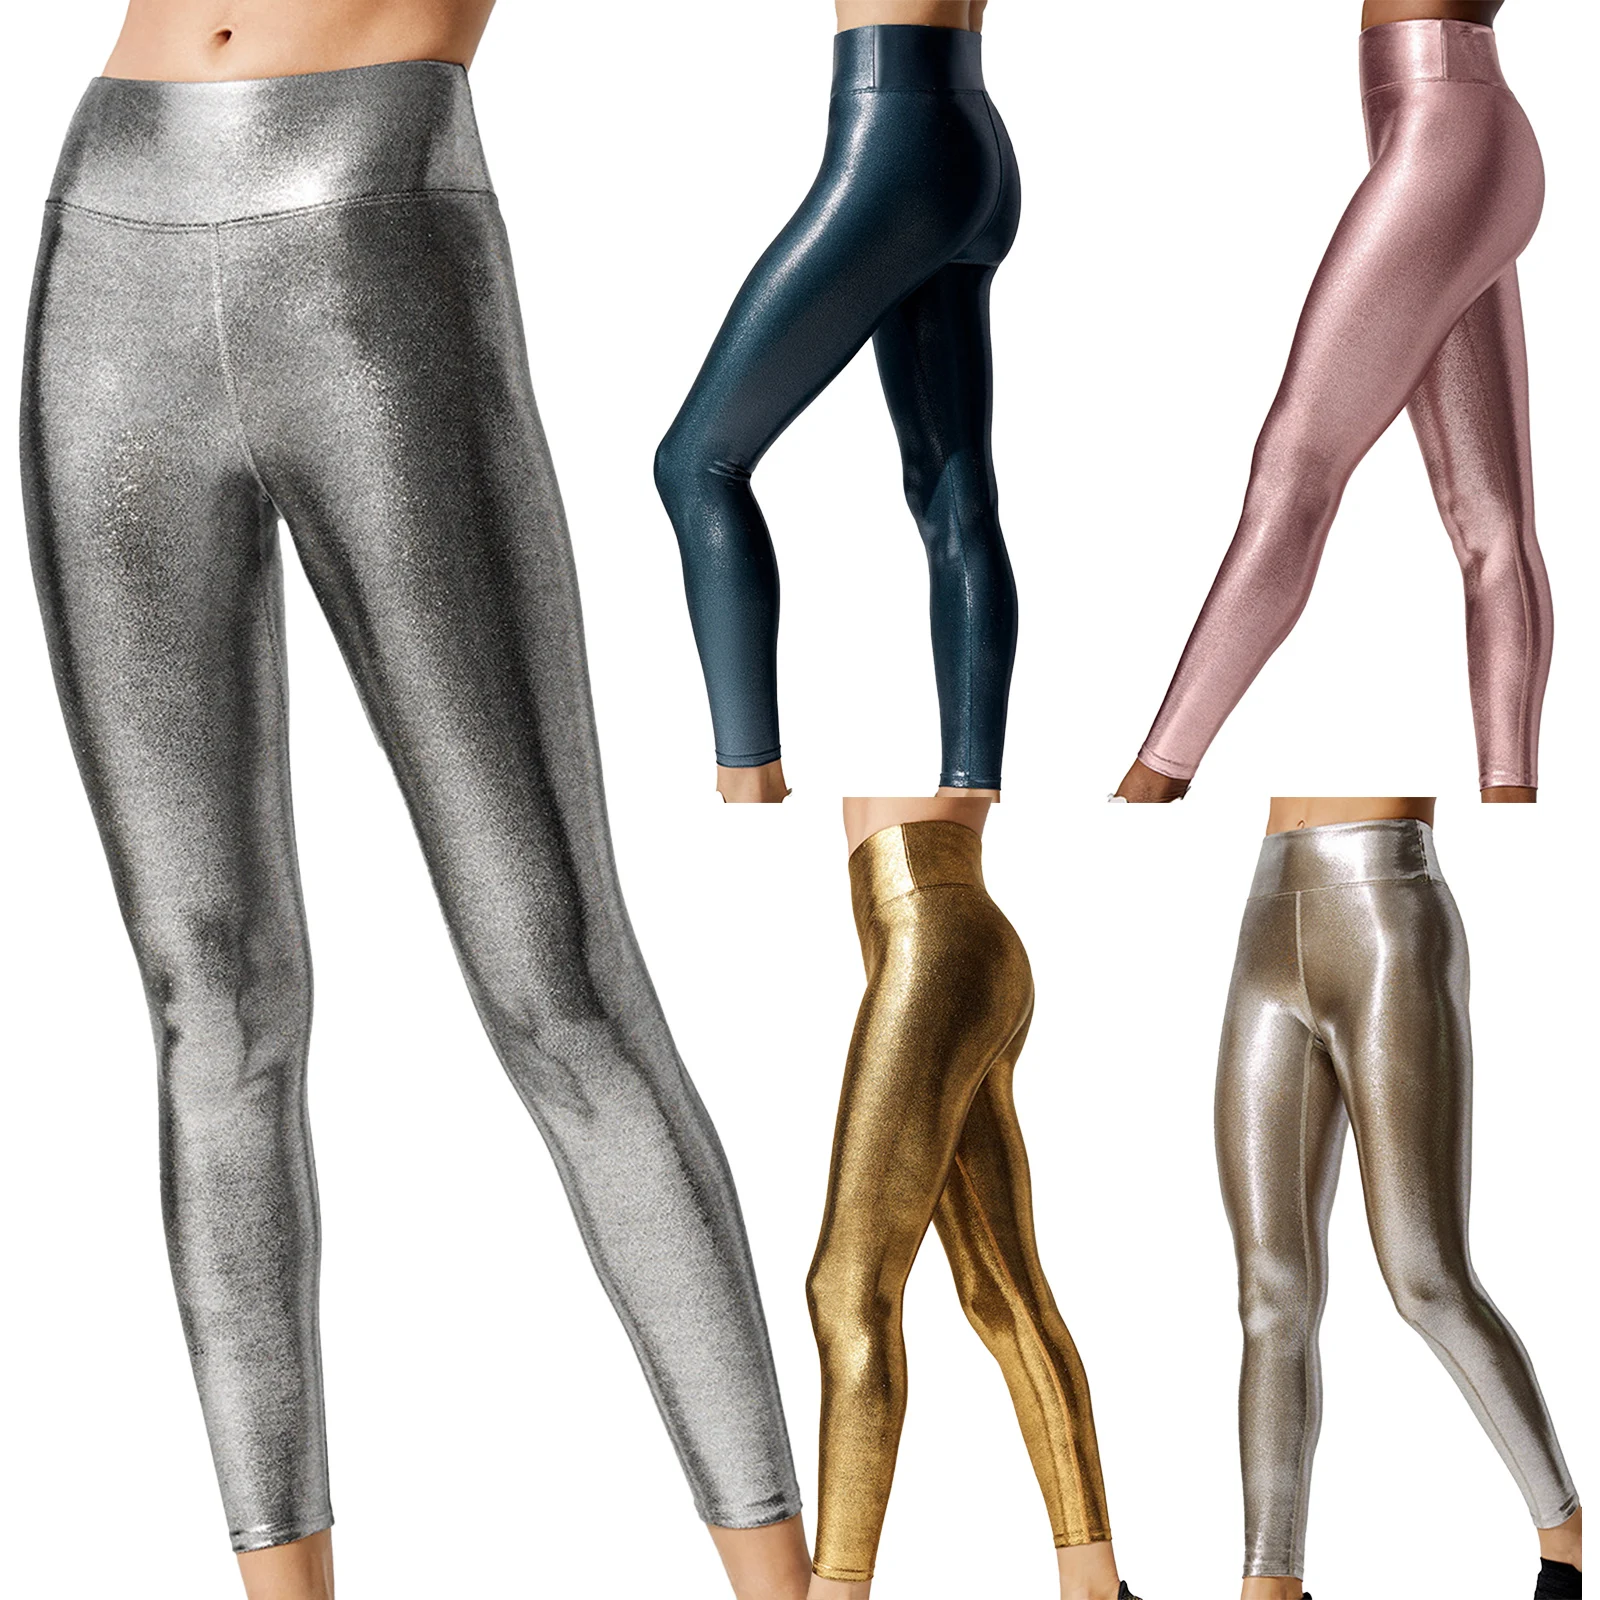 

Women Stretchy Leggings Tight Pants Pure Color High Waist Wide Elastic Waistband Shiny Metallic Sexy Trousers For Yoga Sport Gym